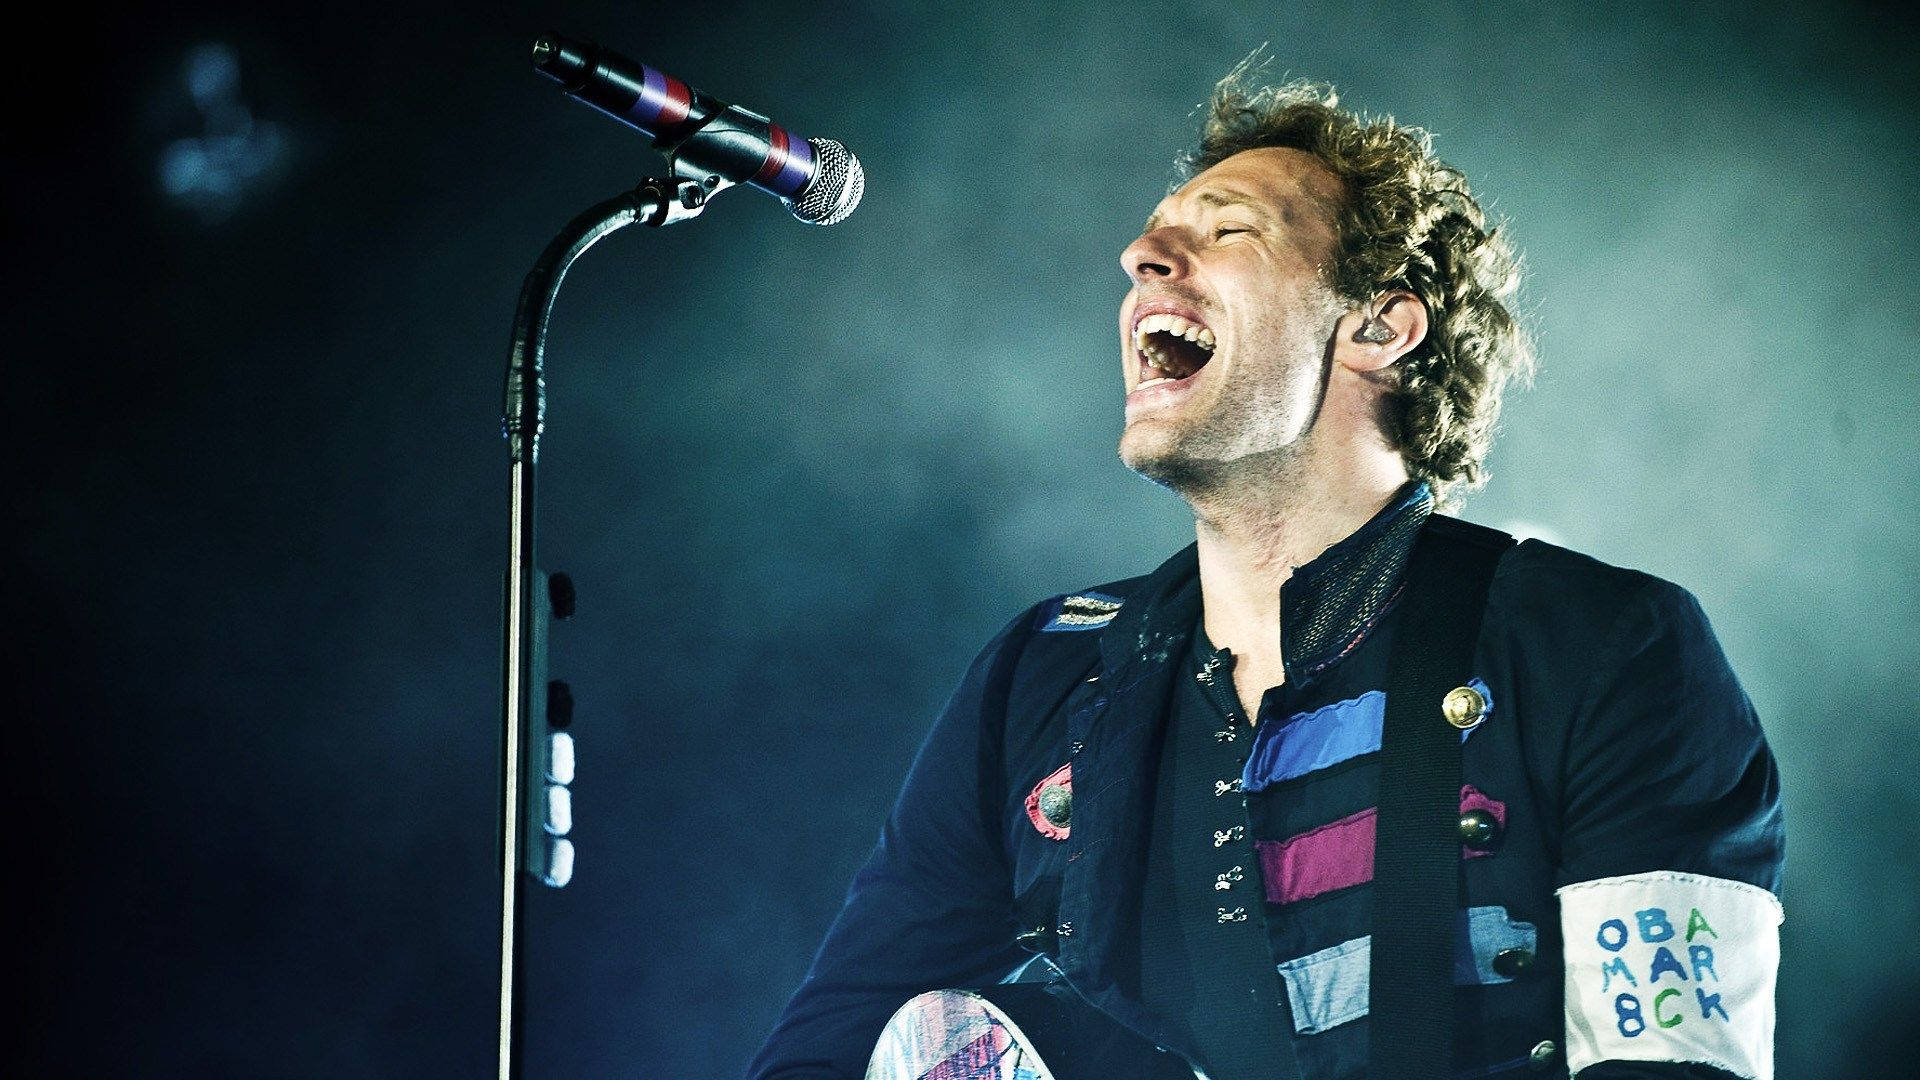 Chris Martin Coldplay Live Picture